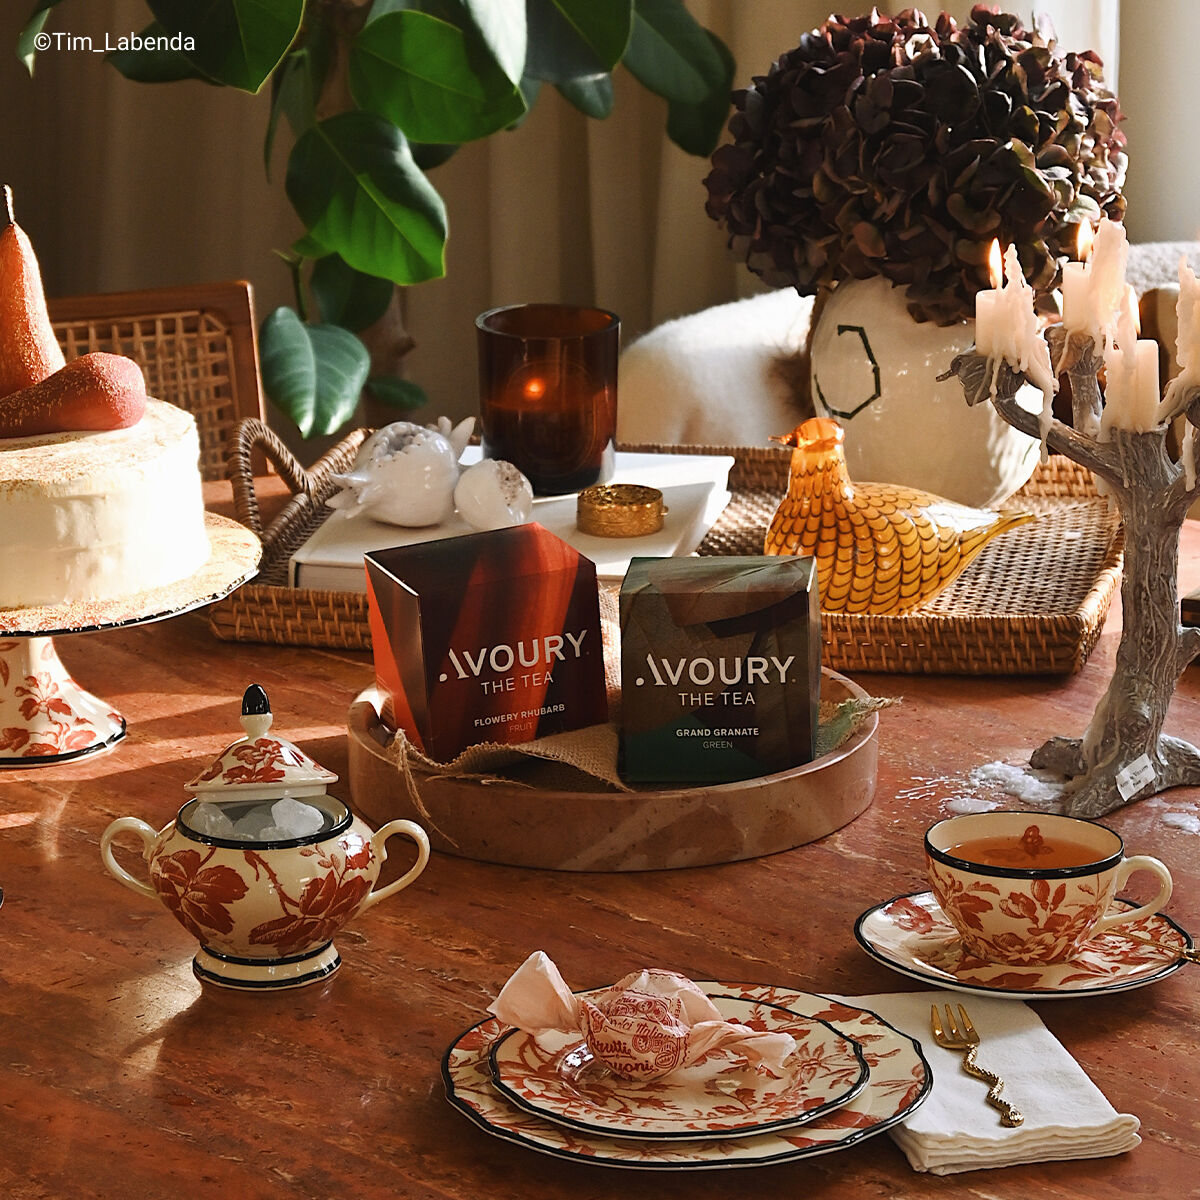 decorated table with Avoury tea boxes